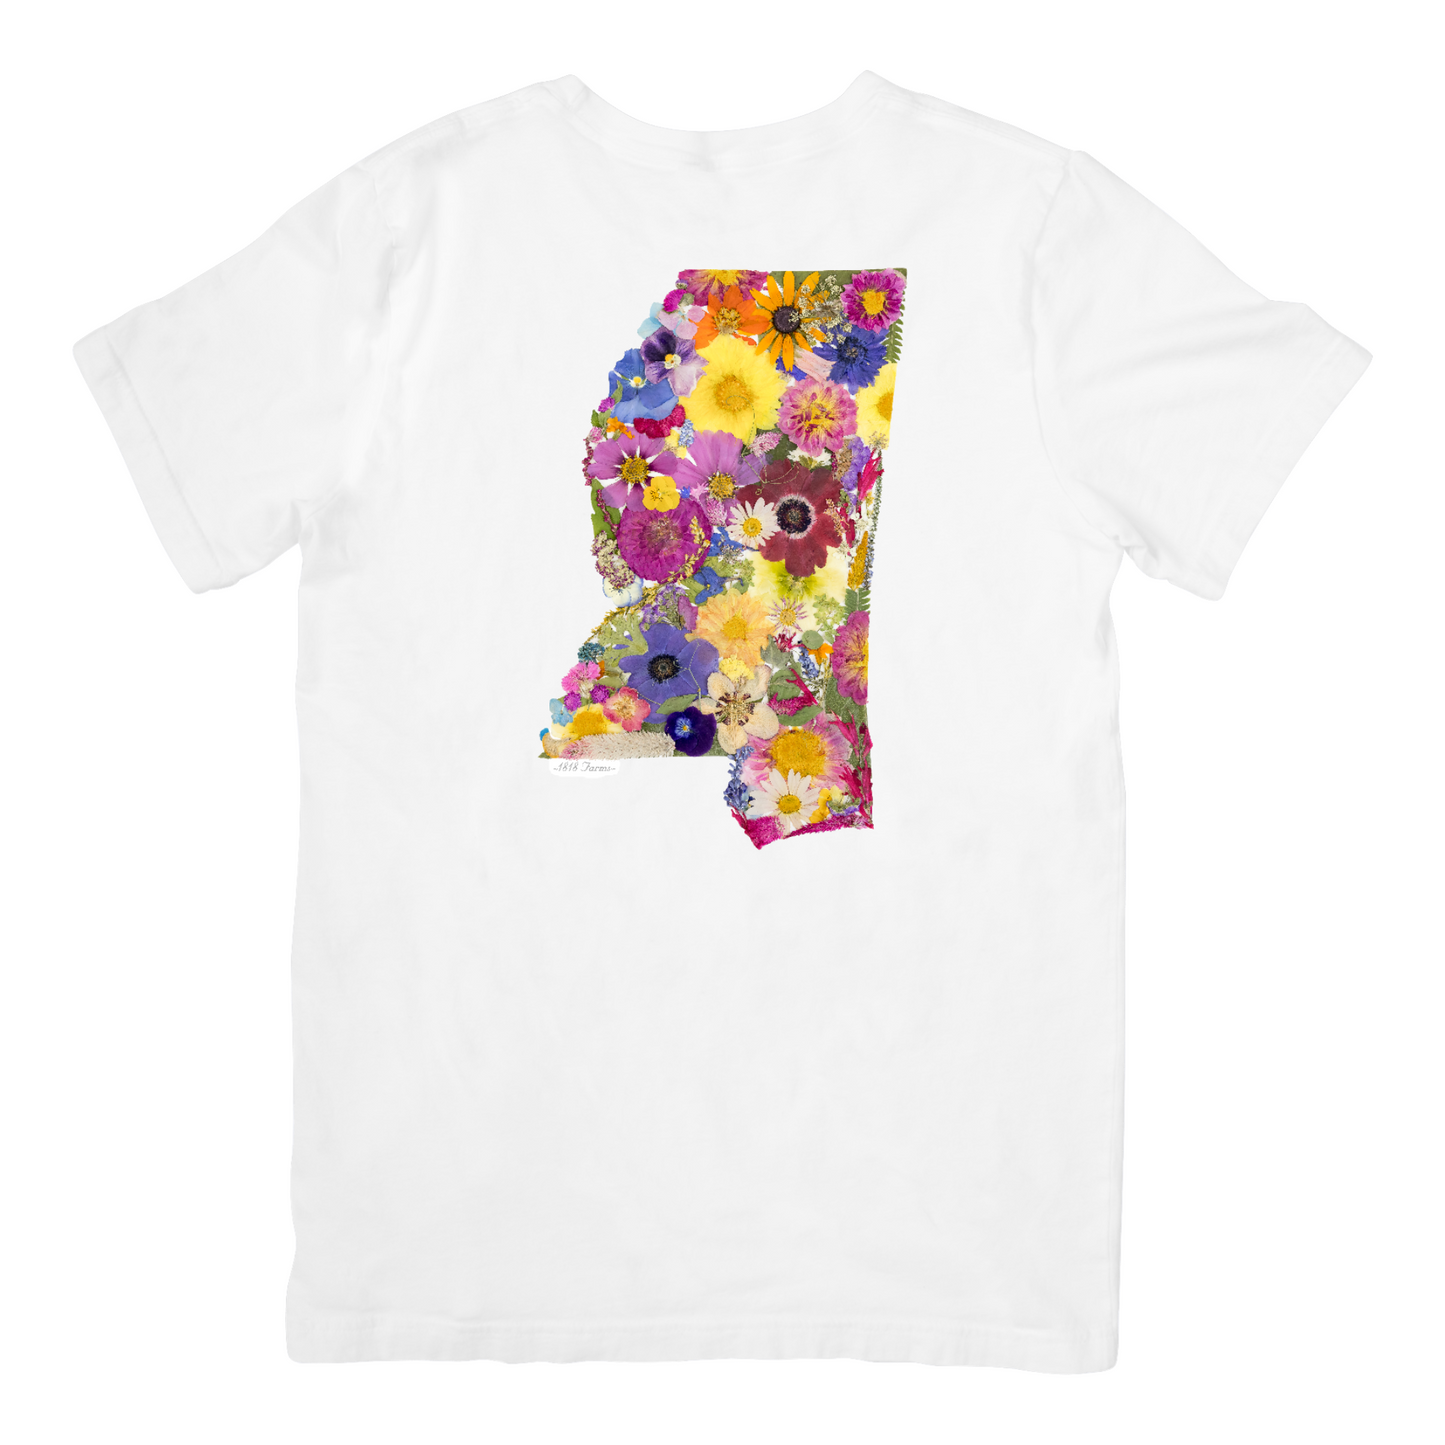 Mississippi Themed Comfort Colors Tshirt - "Where I Bloom" Collection T-Shirts 1818 Farms Small White 